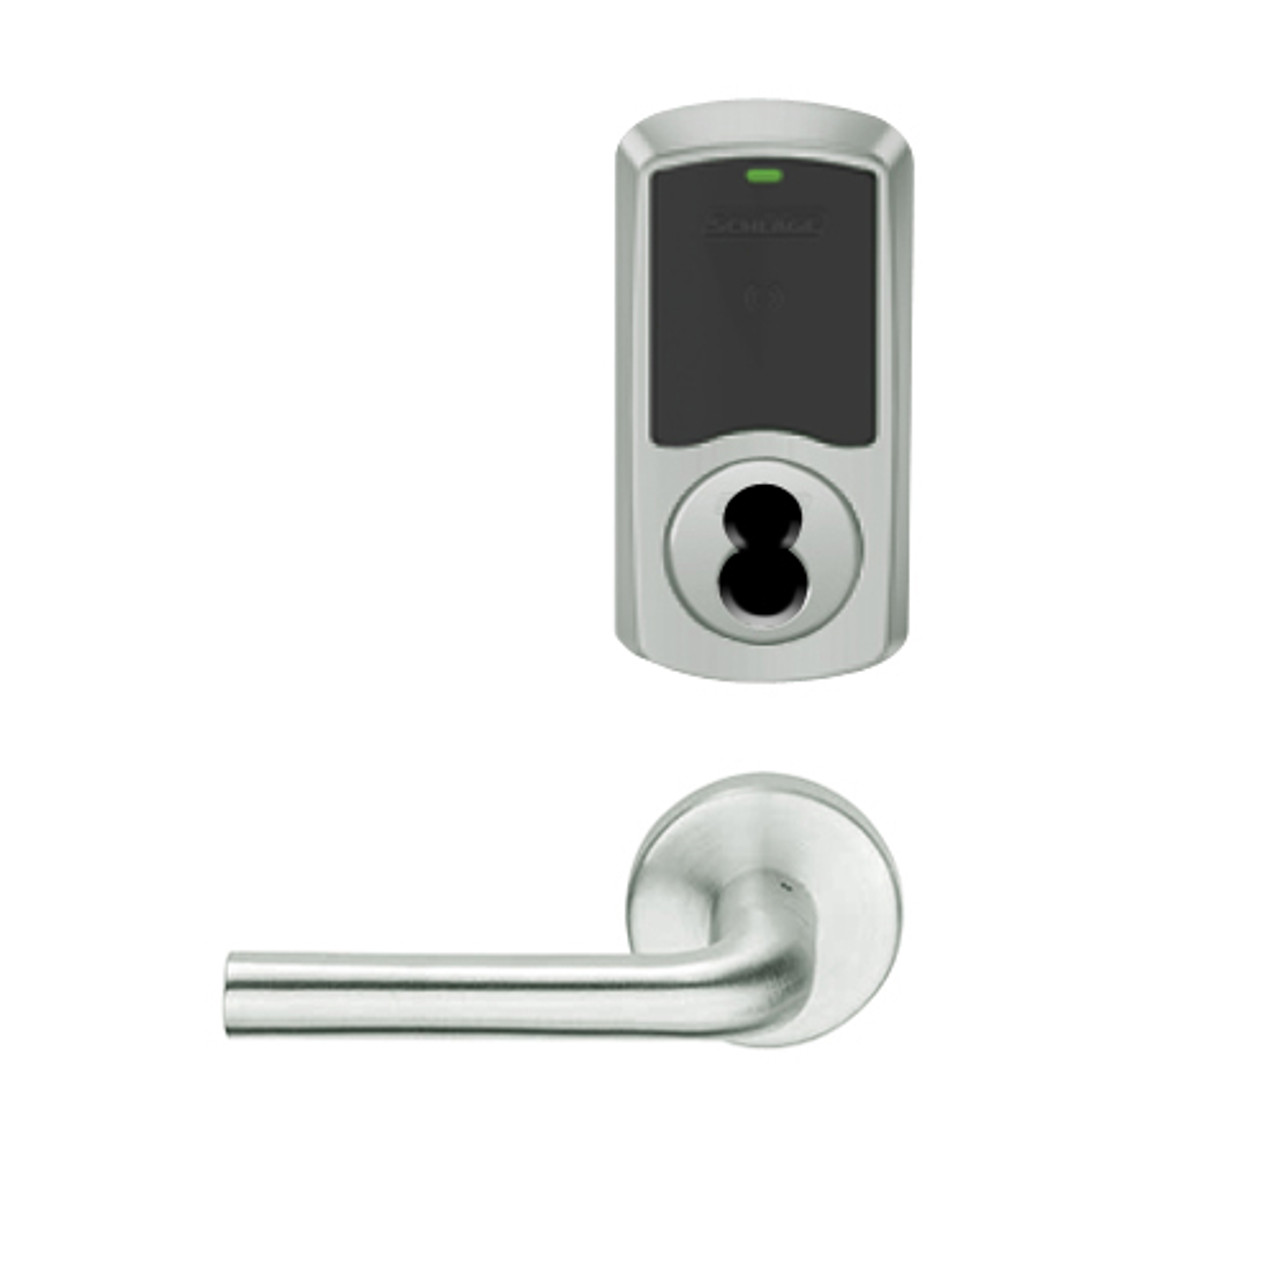 LEMB-GRW-BD-02-619-00A Schlage Privacy/Office Wireless Greenwich Mortise Lock with Push Button & LED Indicator and 02 Lever Prepped for SFIC in Satin Nickel